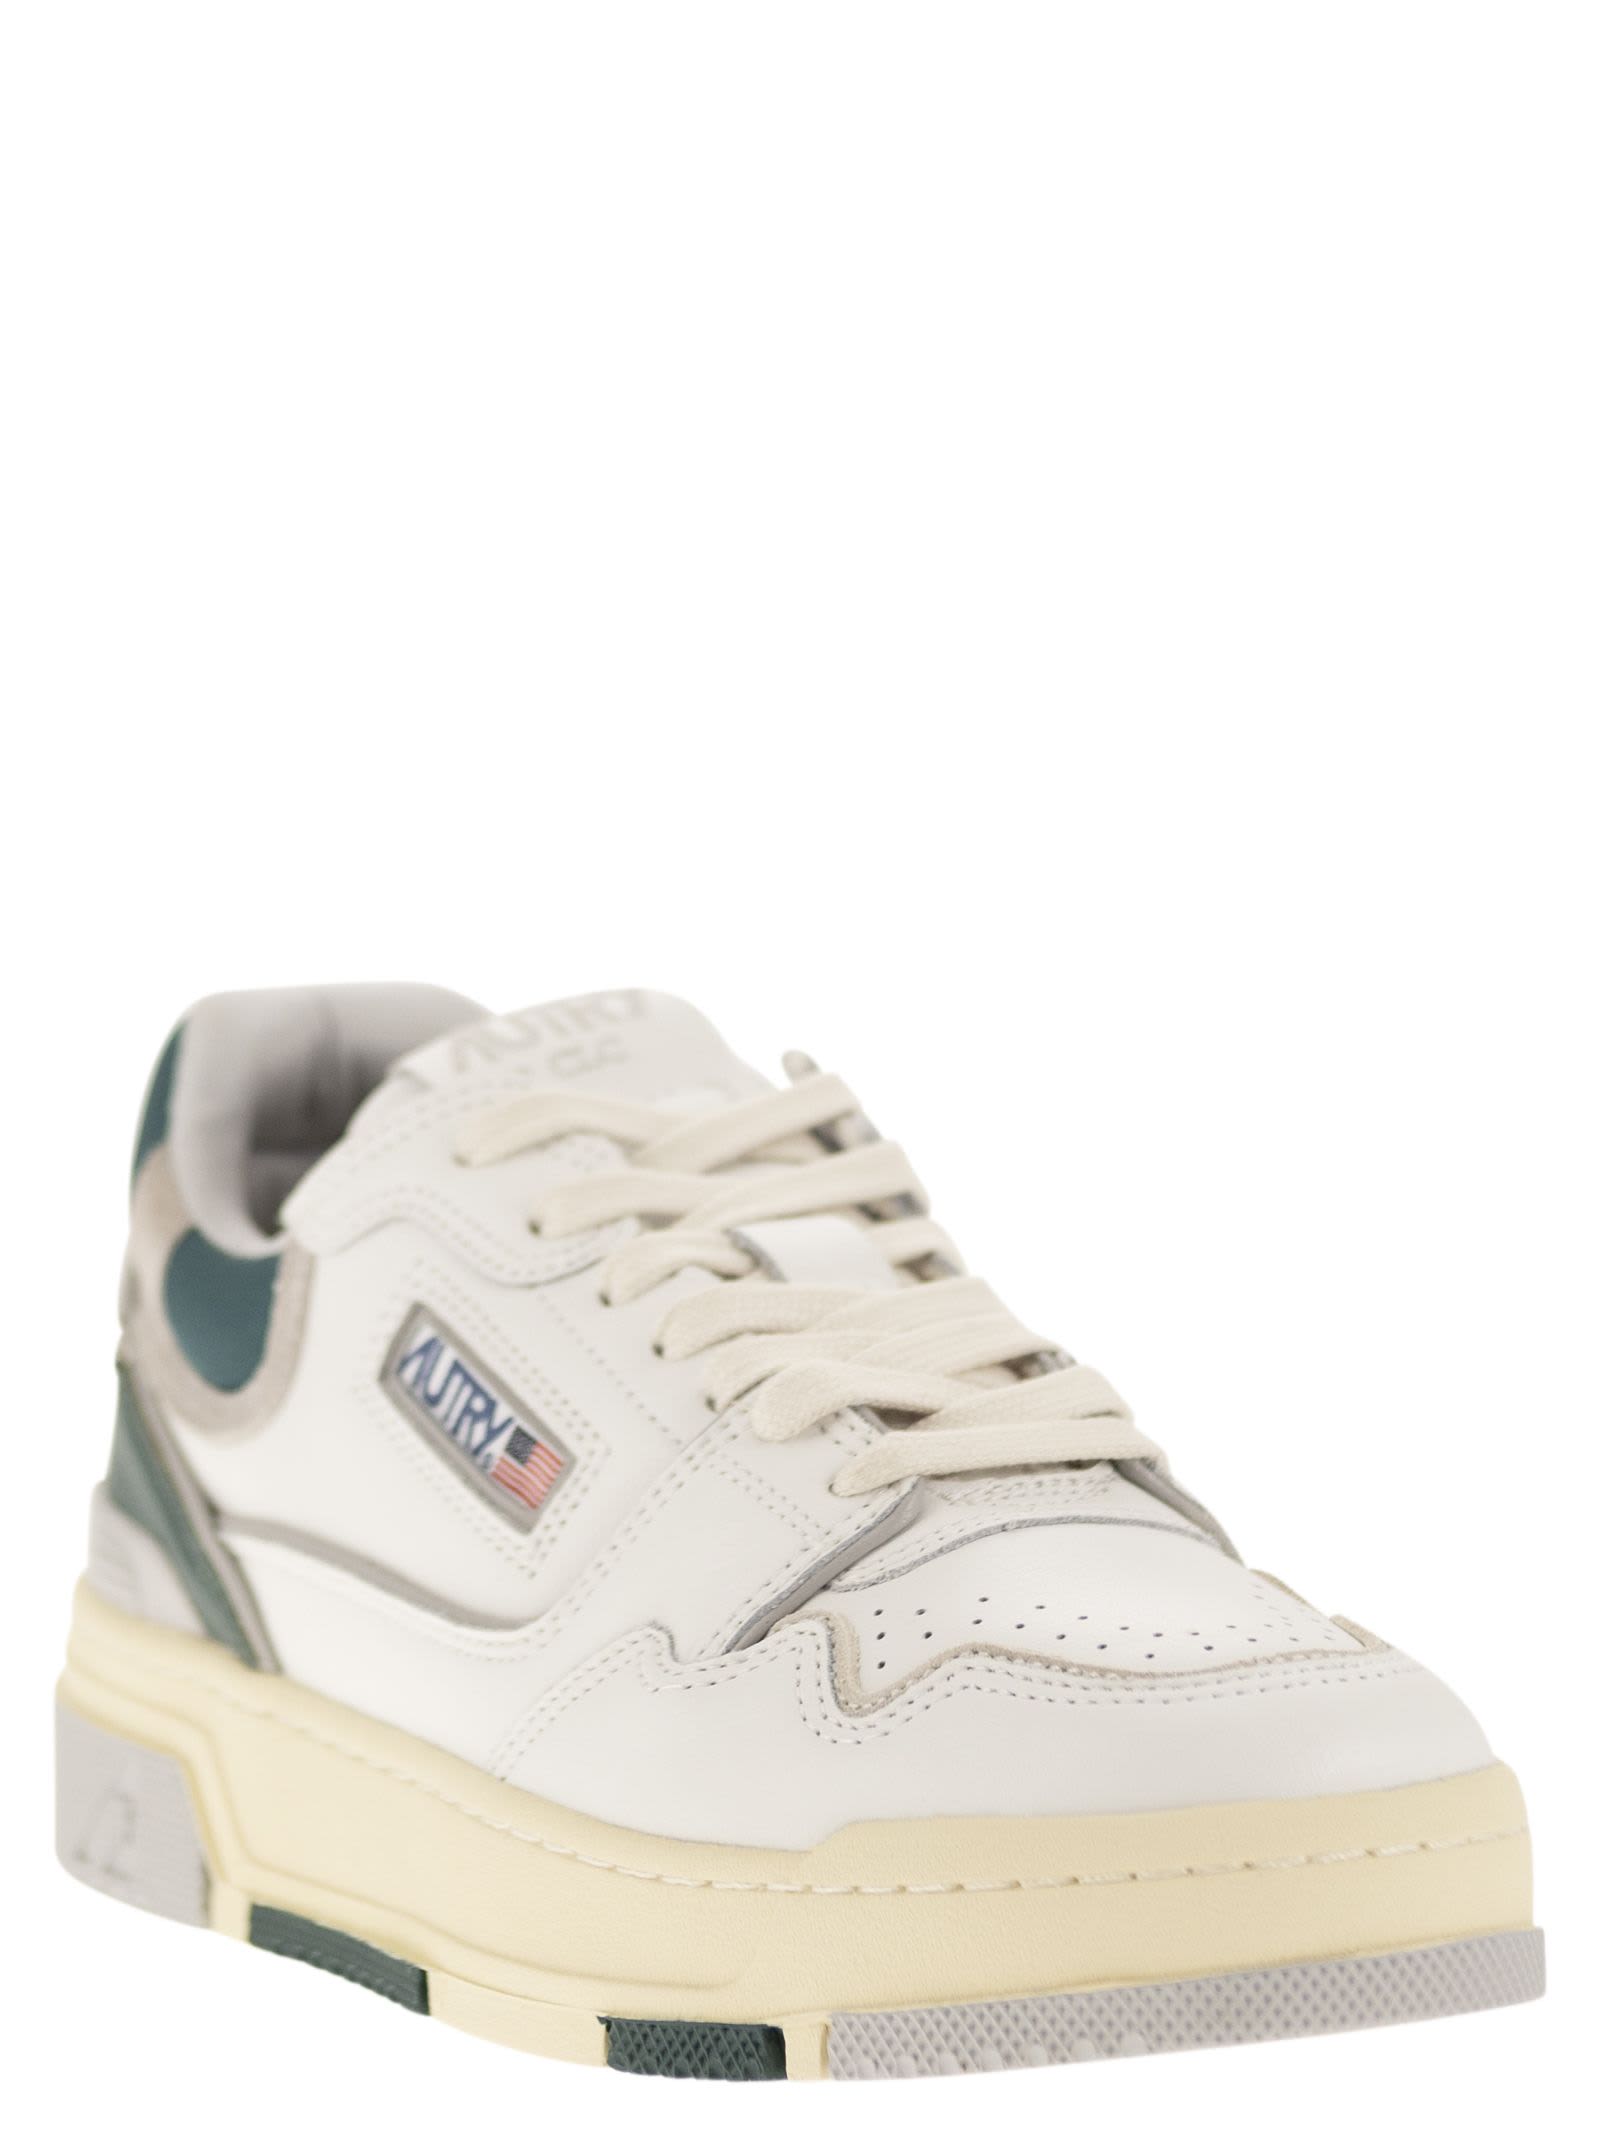 Shop Autry Clc - Leather Sneakers In Wht/vapor/forest